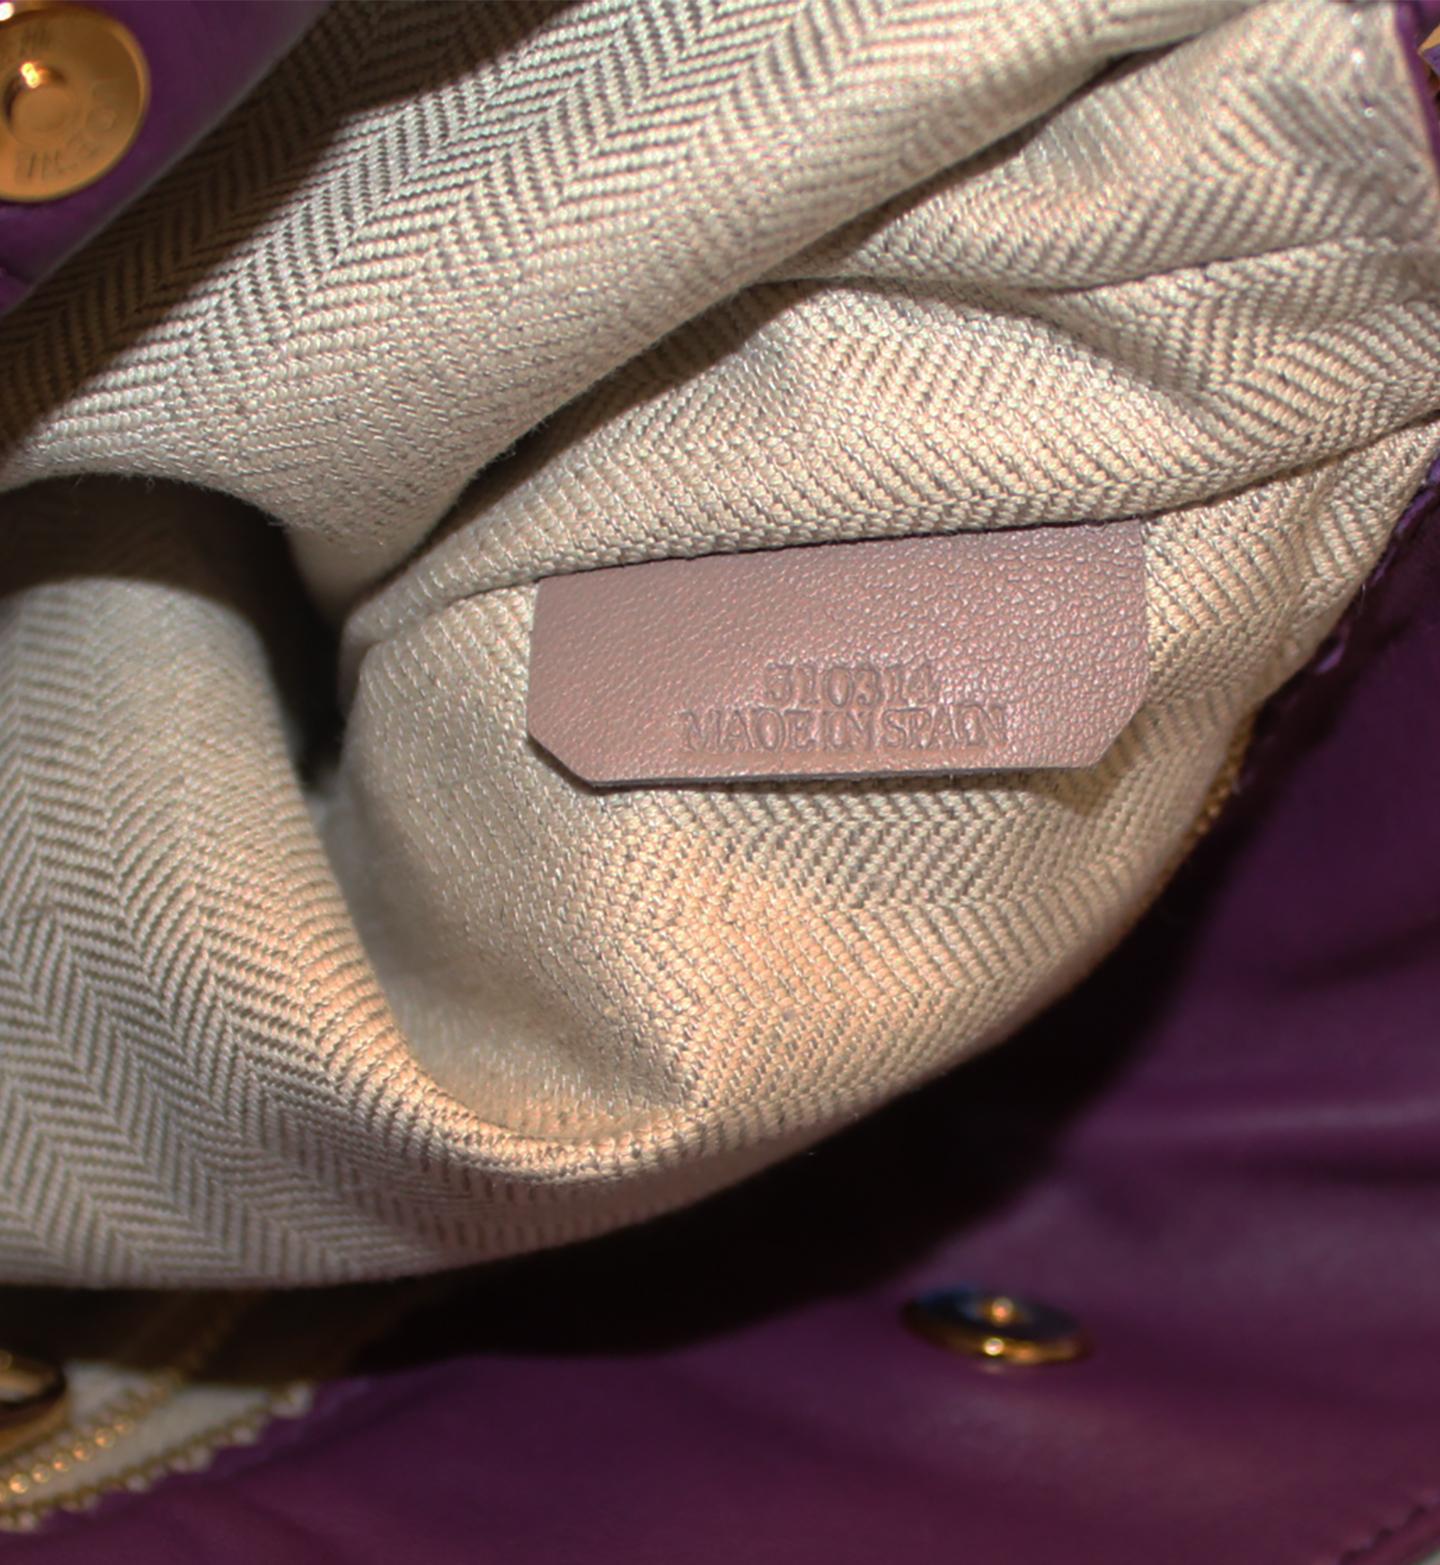 Loewe Purple Flamenco Tassel Bag In Excellent Condition For Sale In Palm Beach, FL